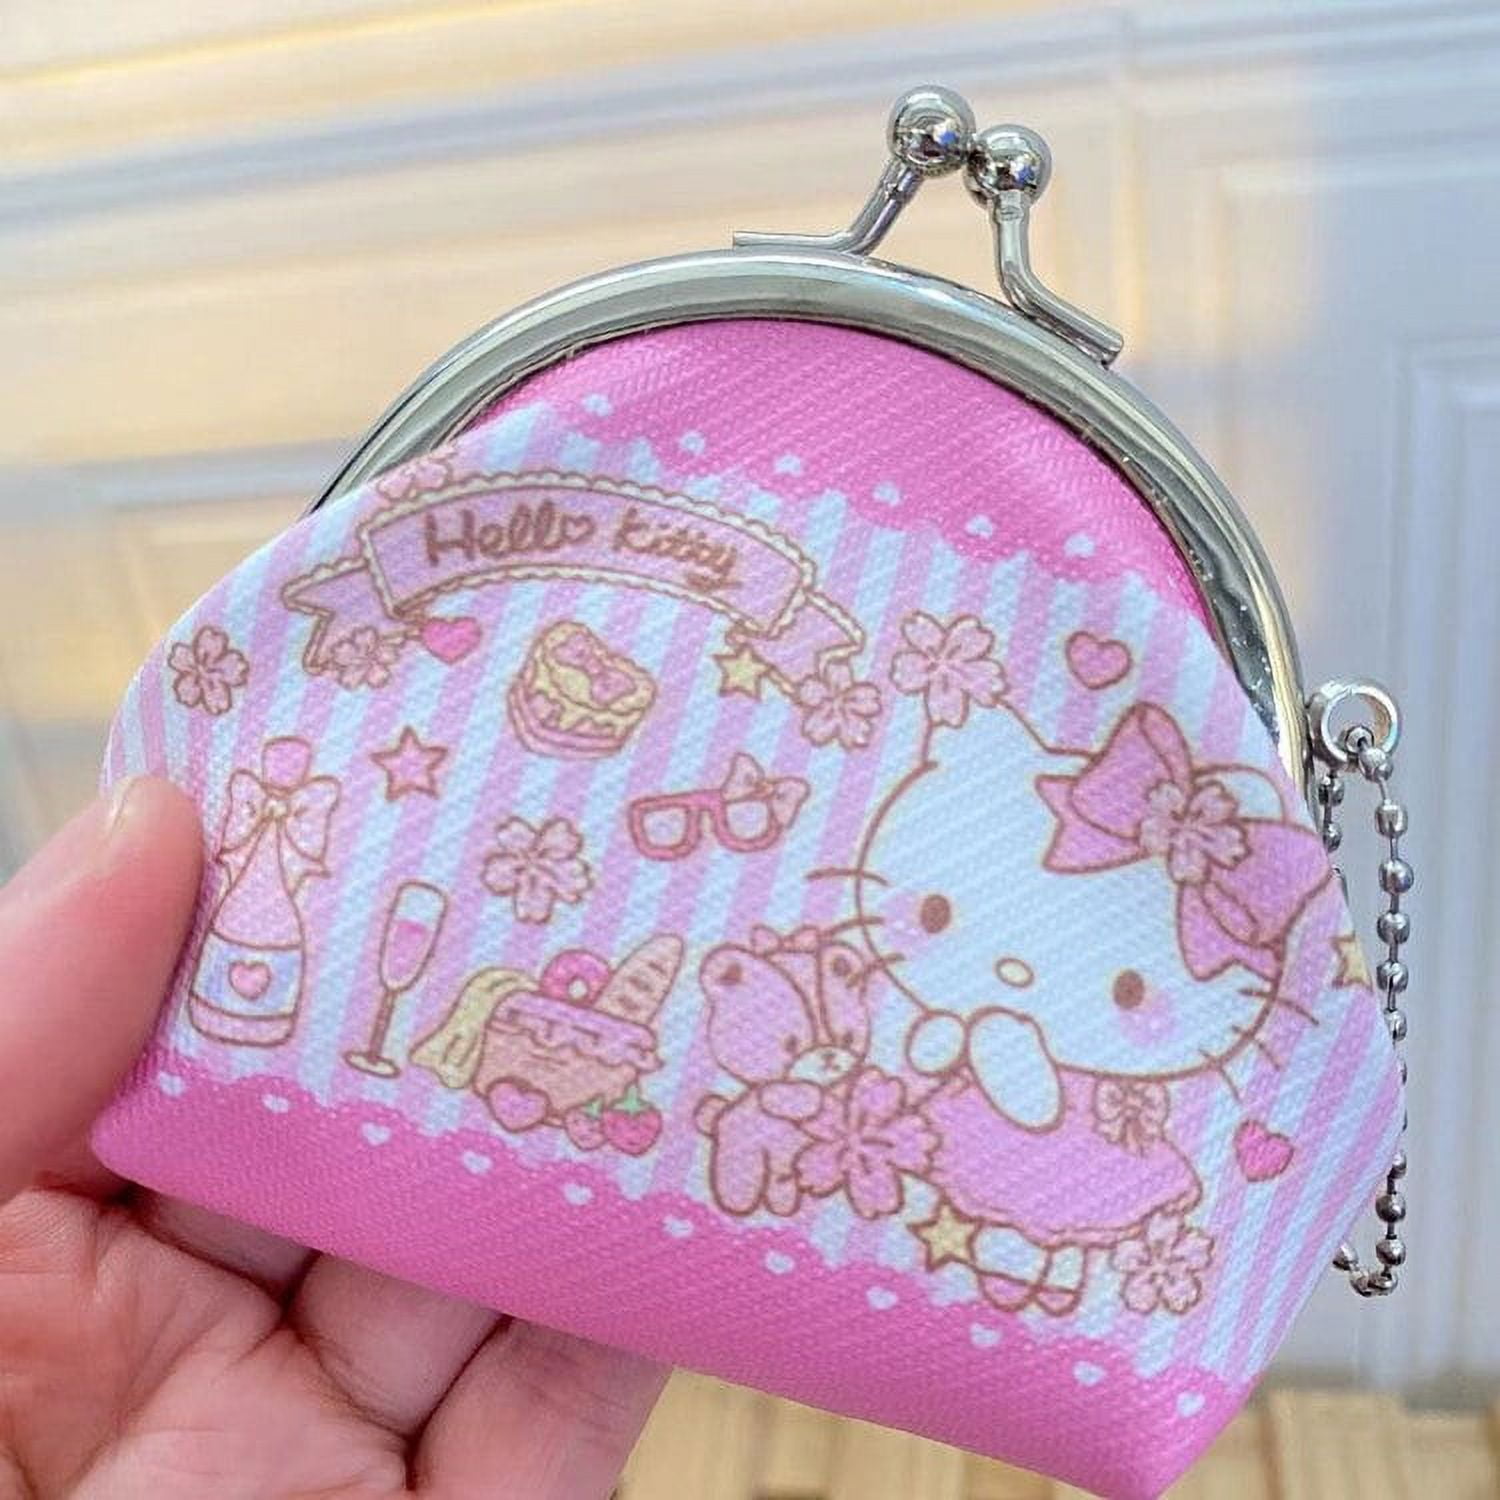 1993 Hello Kitty coin purse | I've had this since my childho… | Flickr